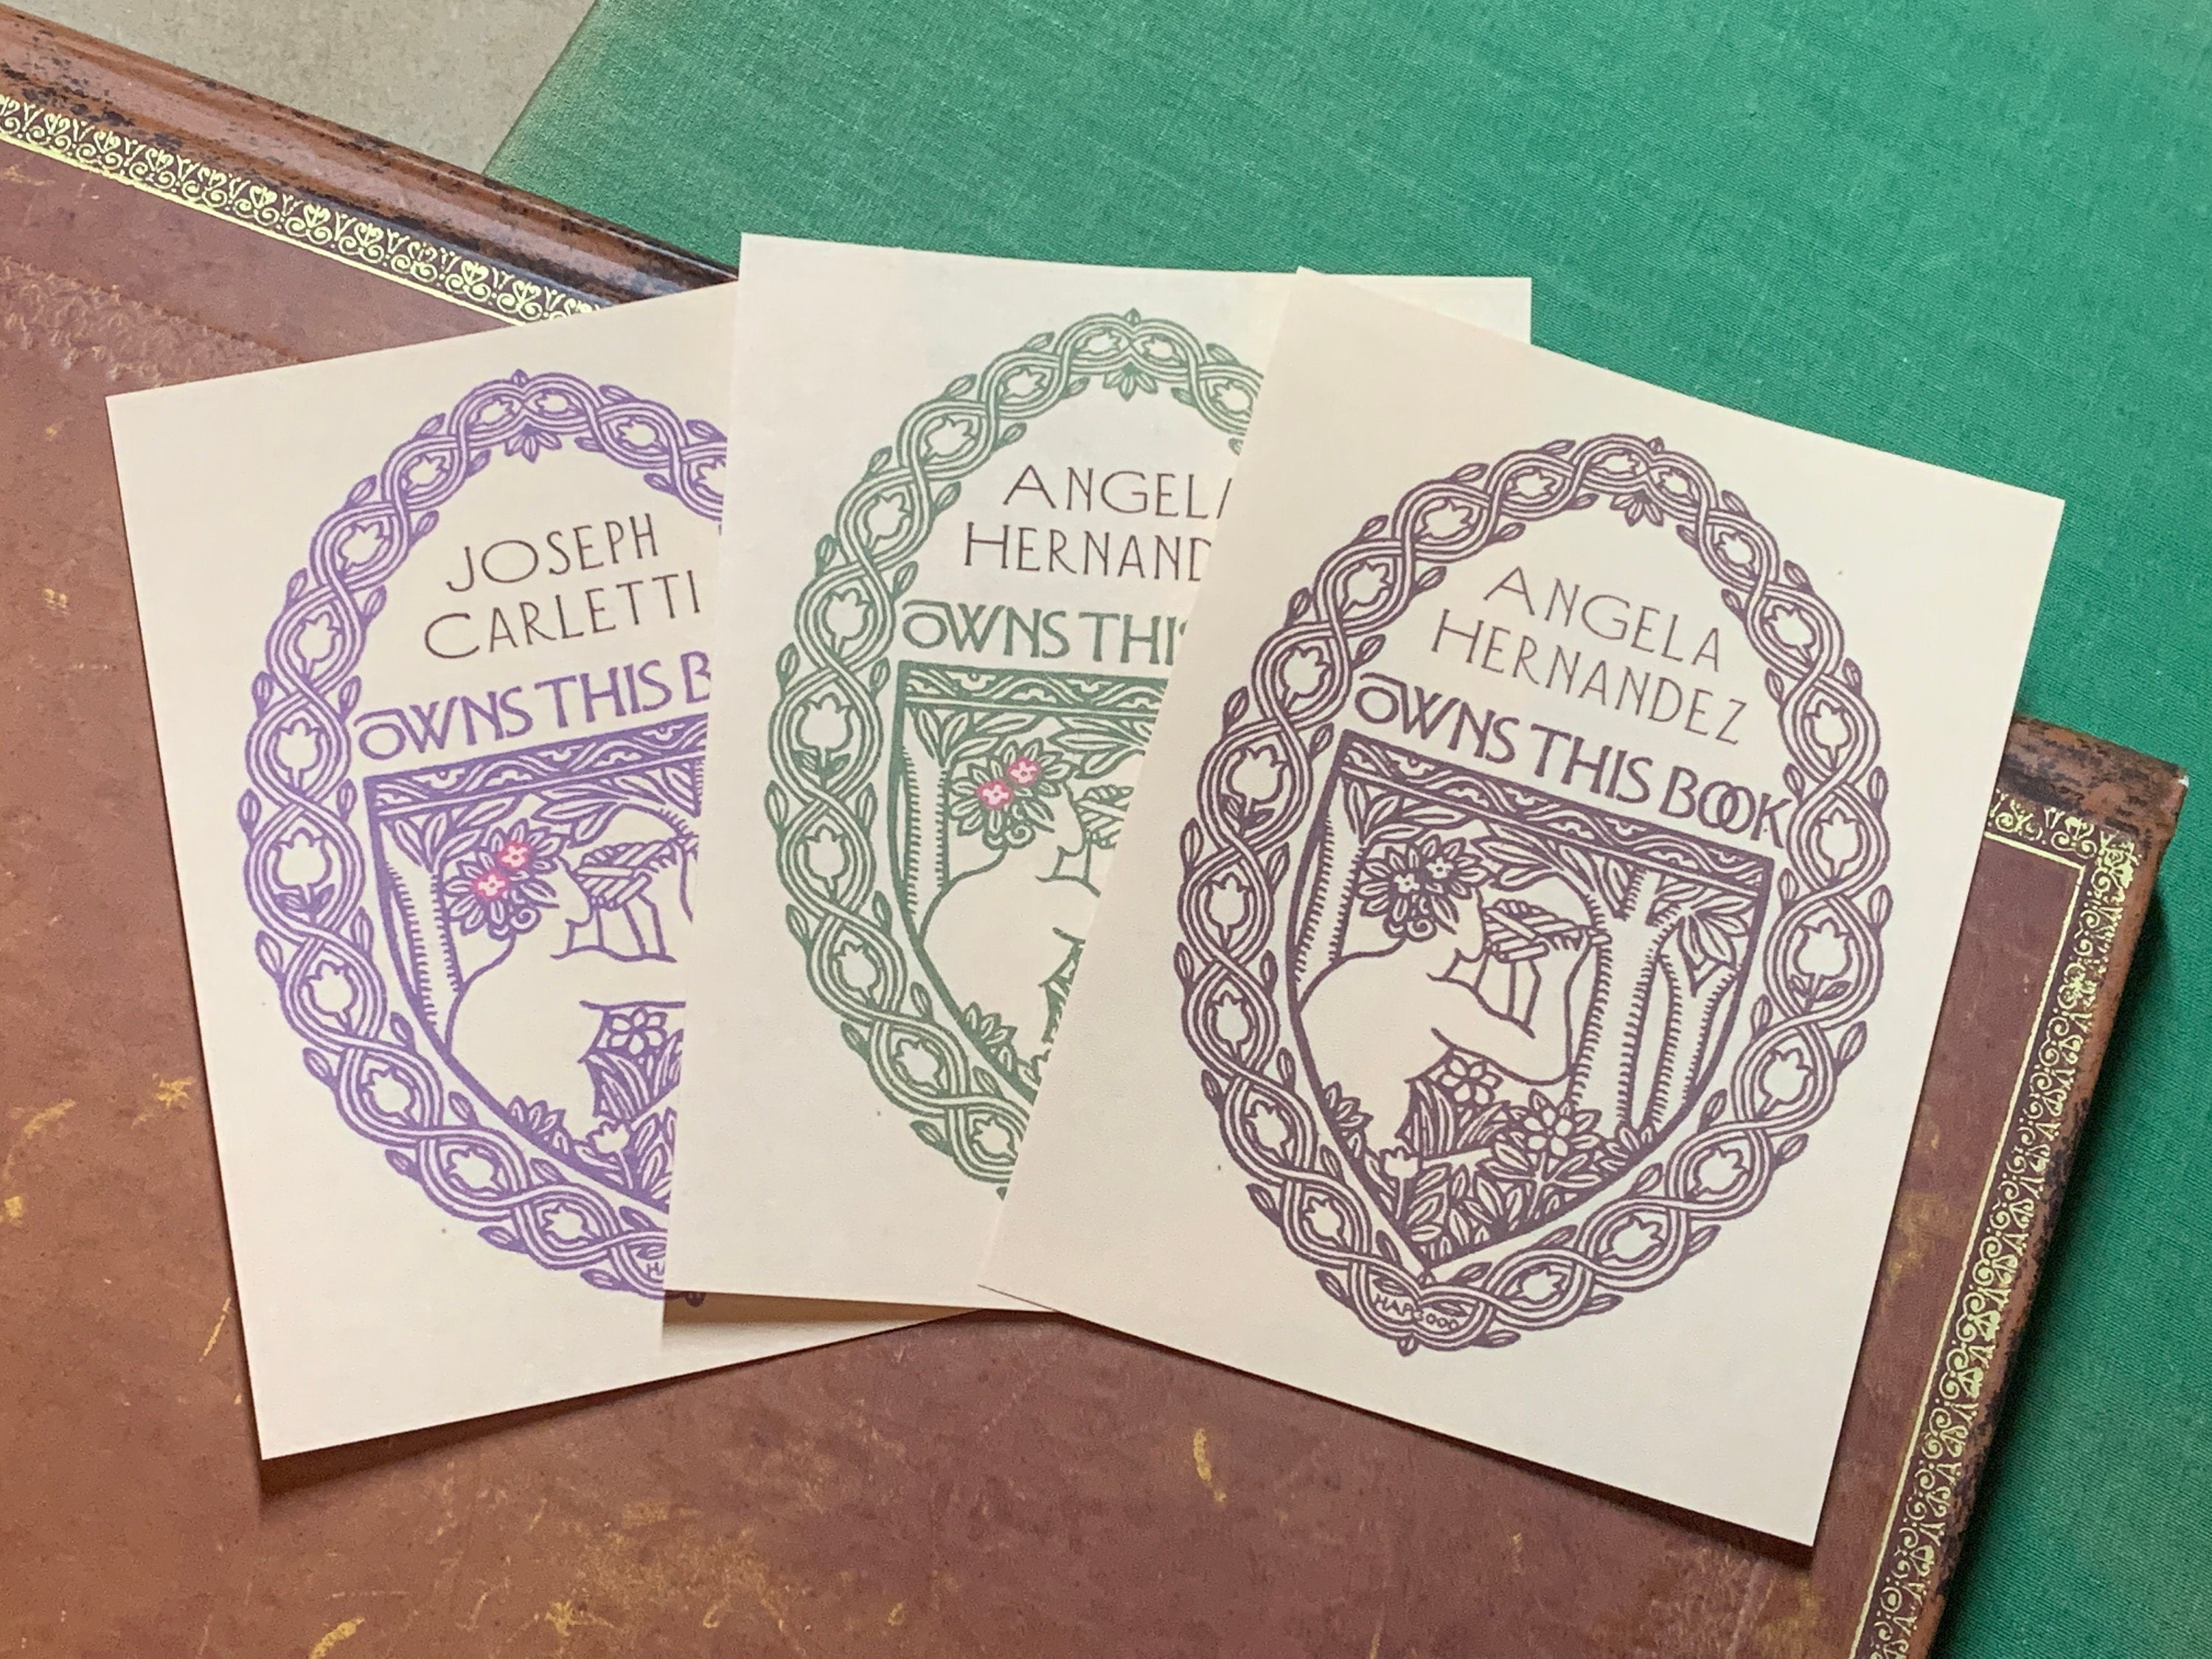 Pan Pipes, Personalized, Ex-Libris Bookplates, Crafted on Traditional Gummed Paper, 3in x 4in, Set of 30